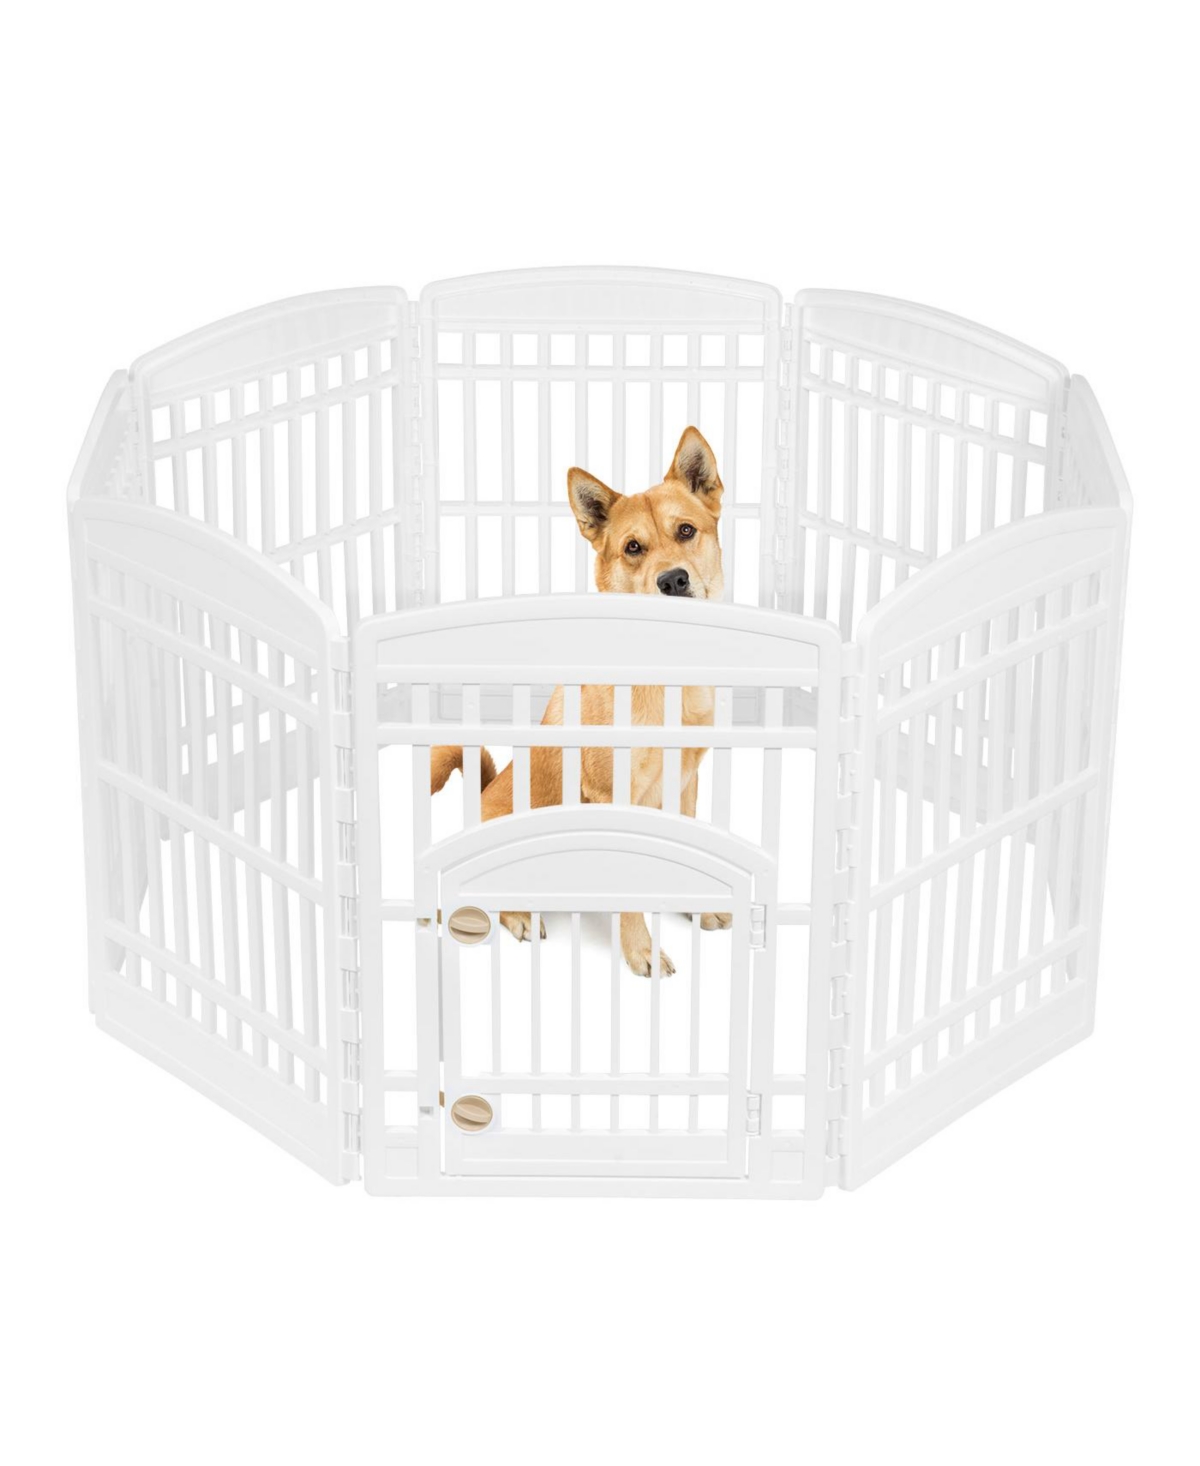 8-Panel 34-inch Exercise Pet Playpen with Door, White - White